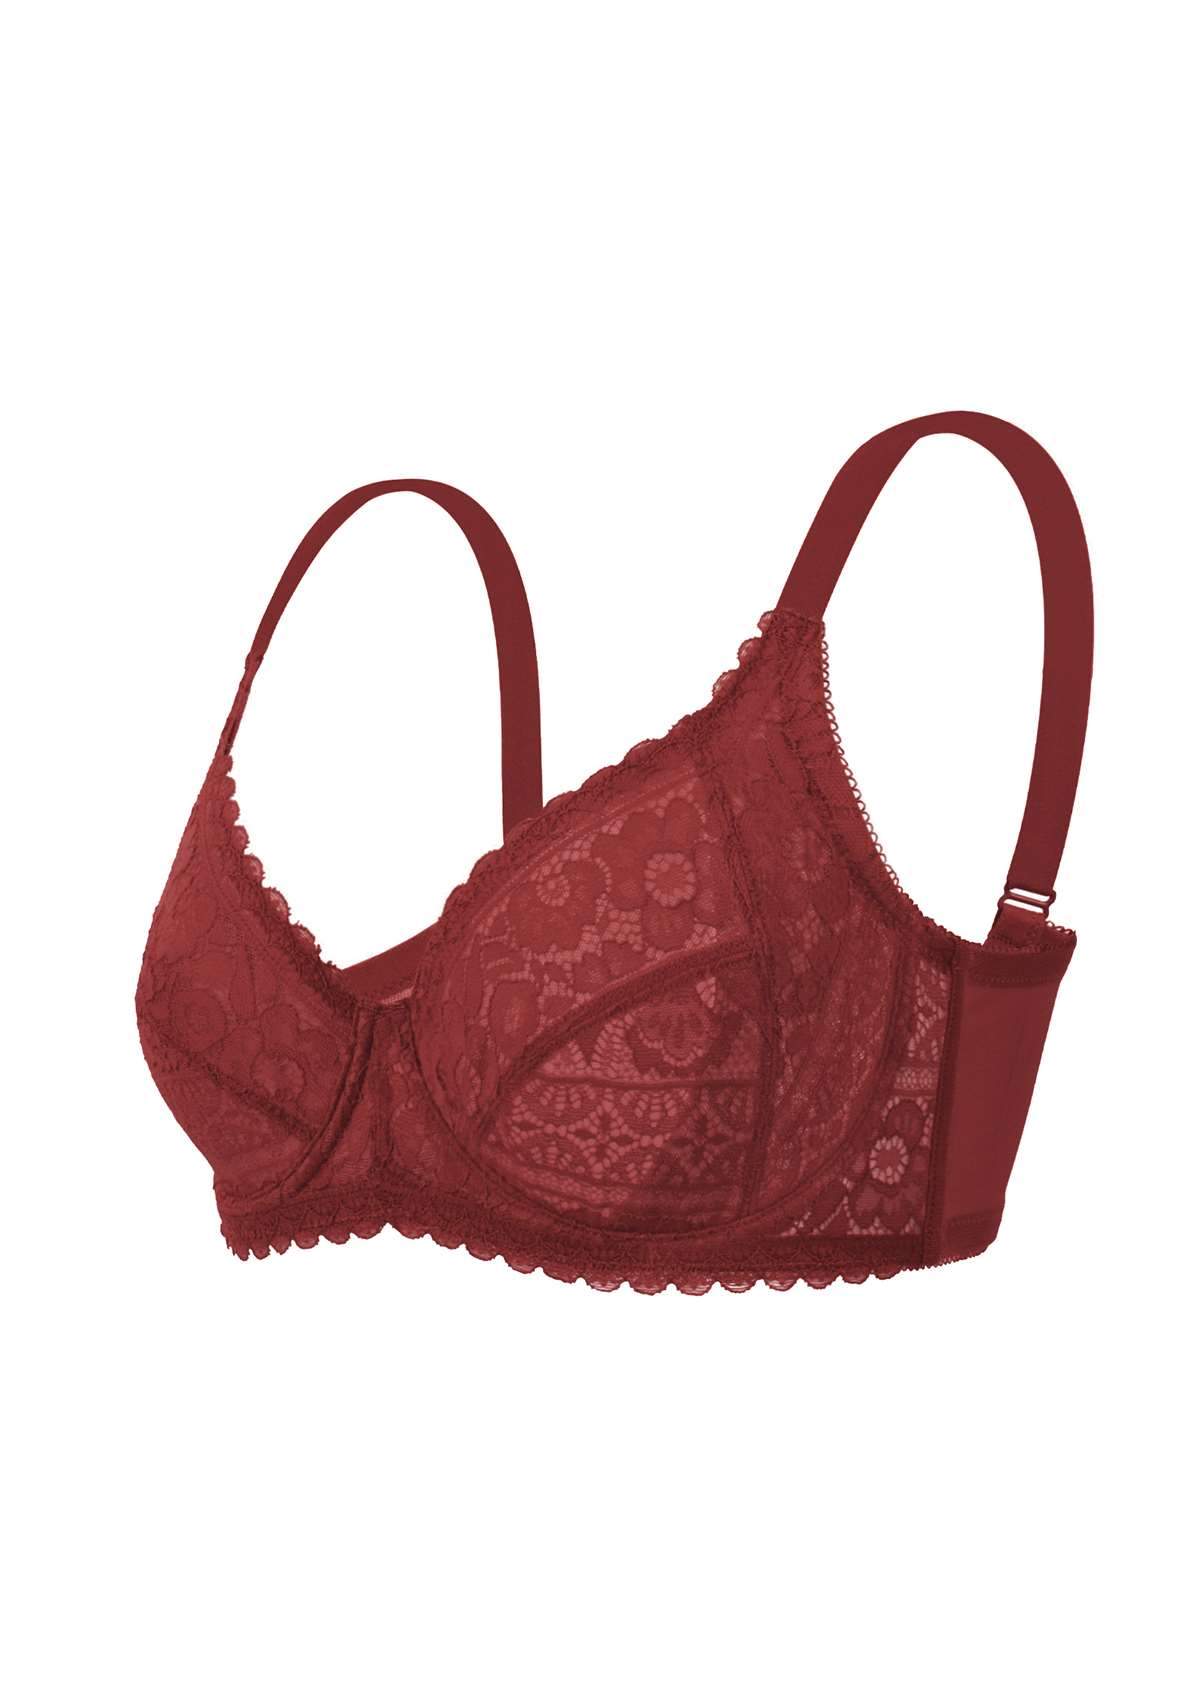 HSIA Freesia Unlined Lace Bra: Bra That Supports Back - Blue / 40 / C